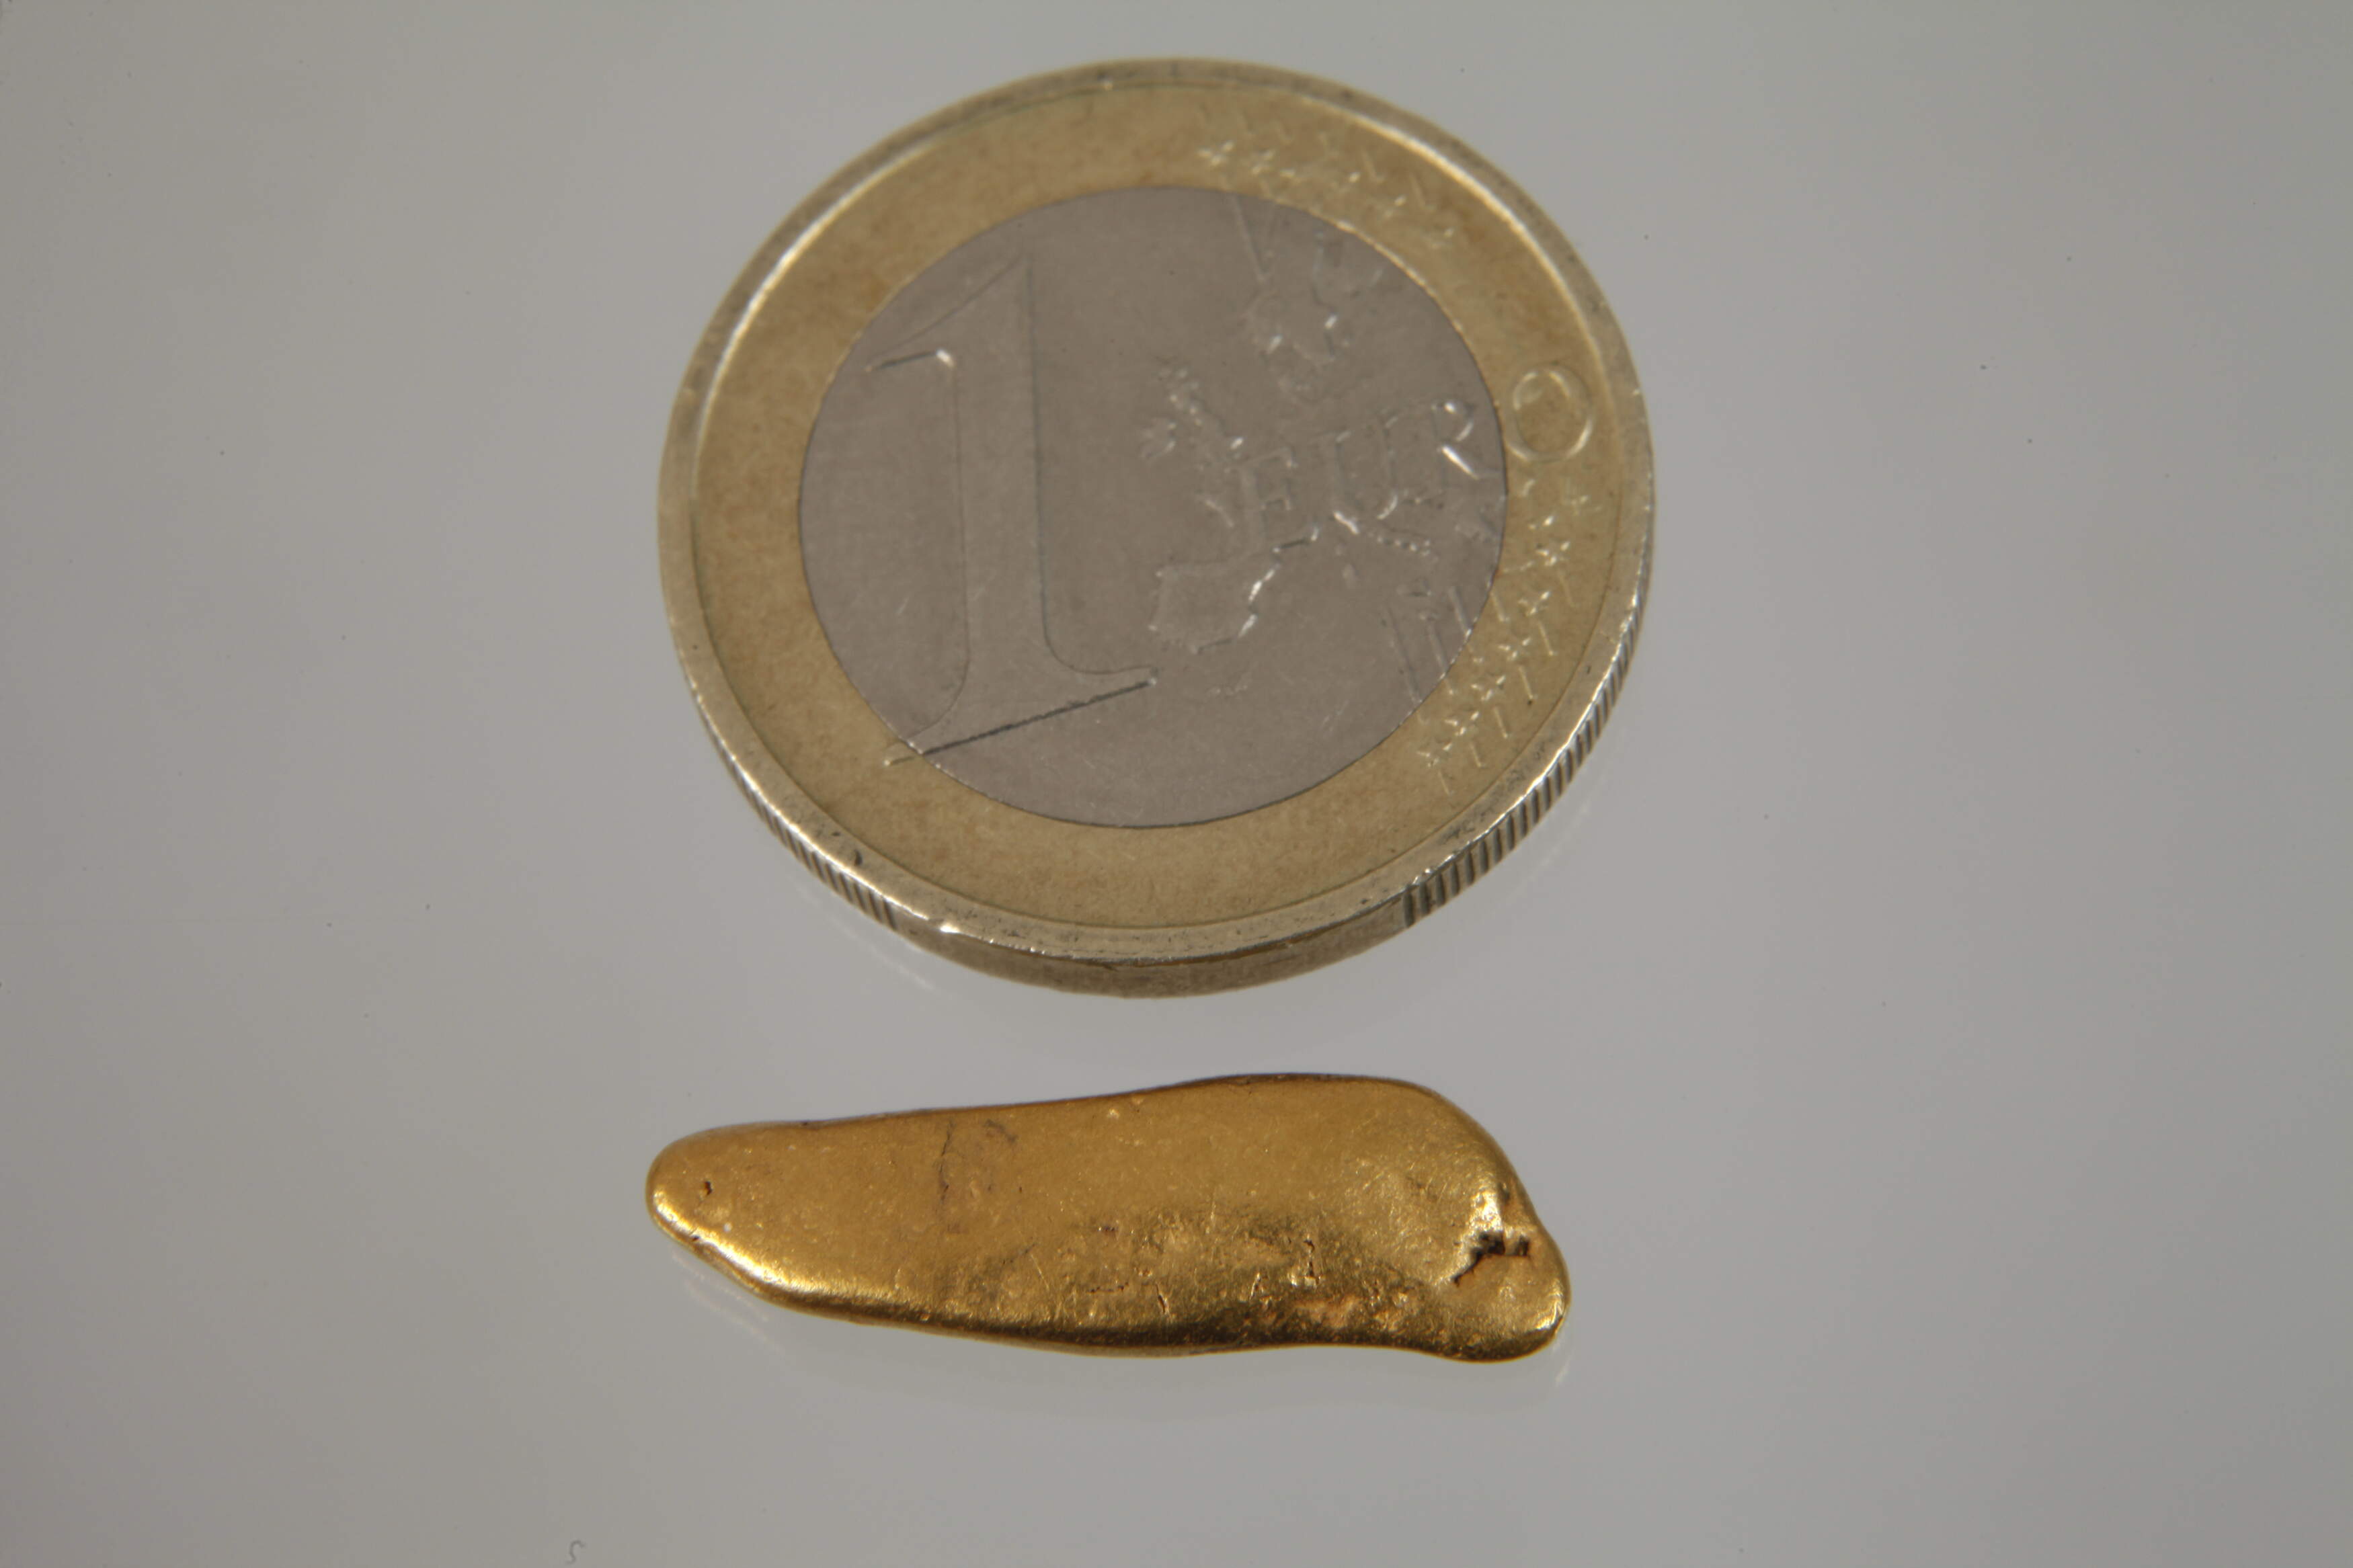 Gold nugget - Image 2 of 3